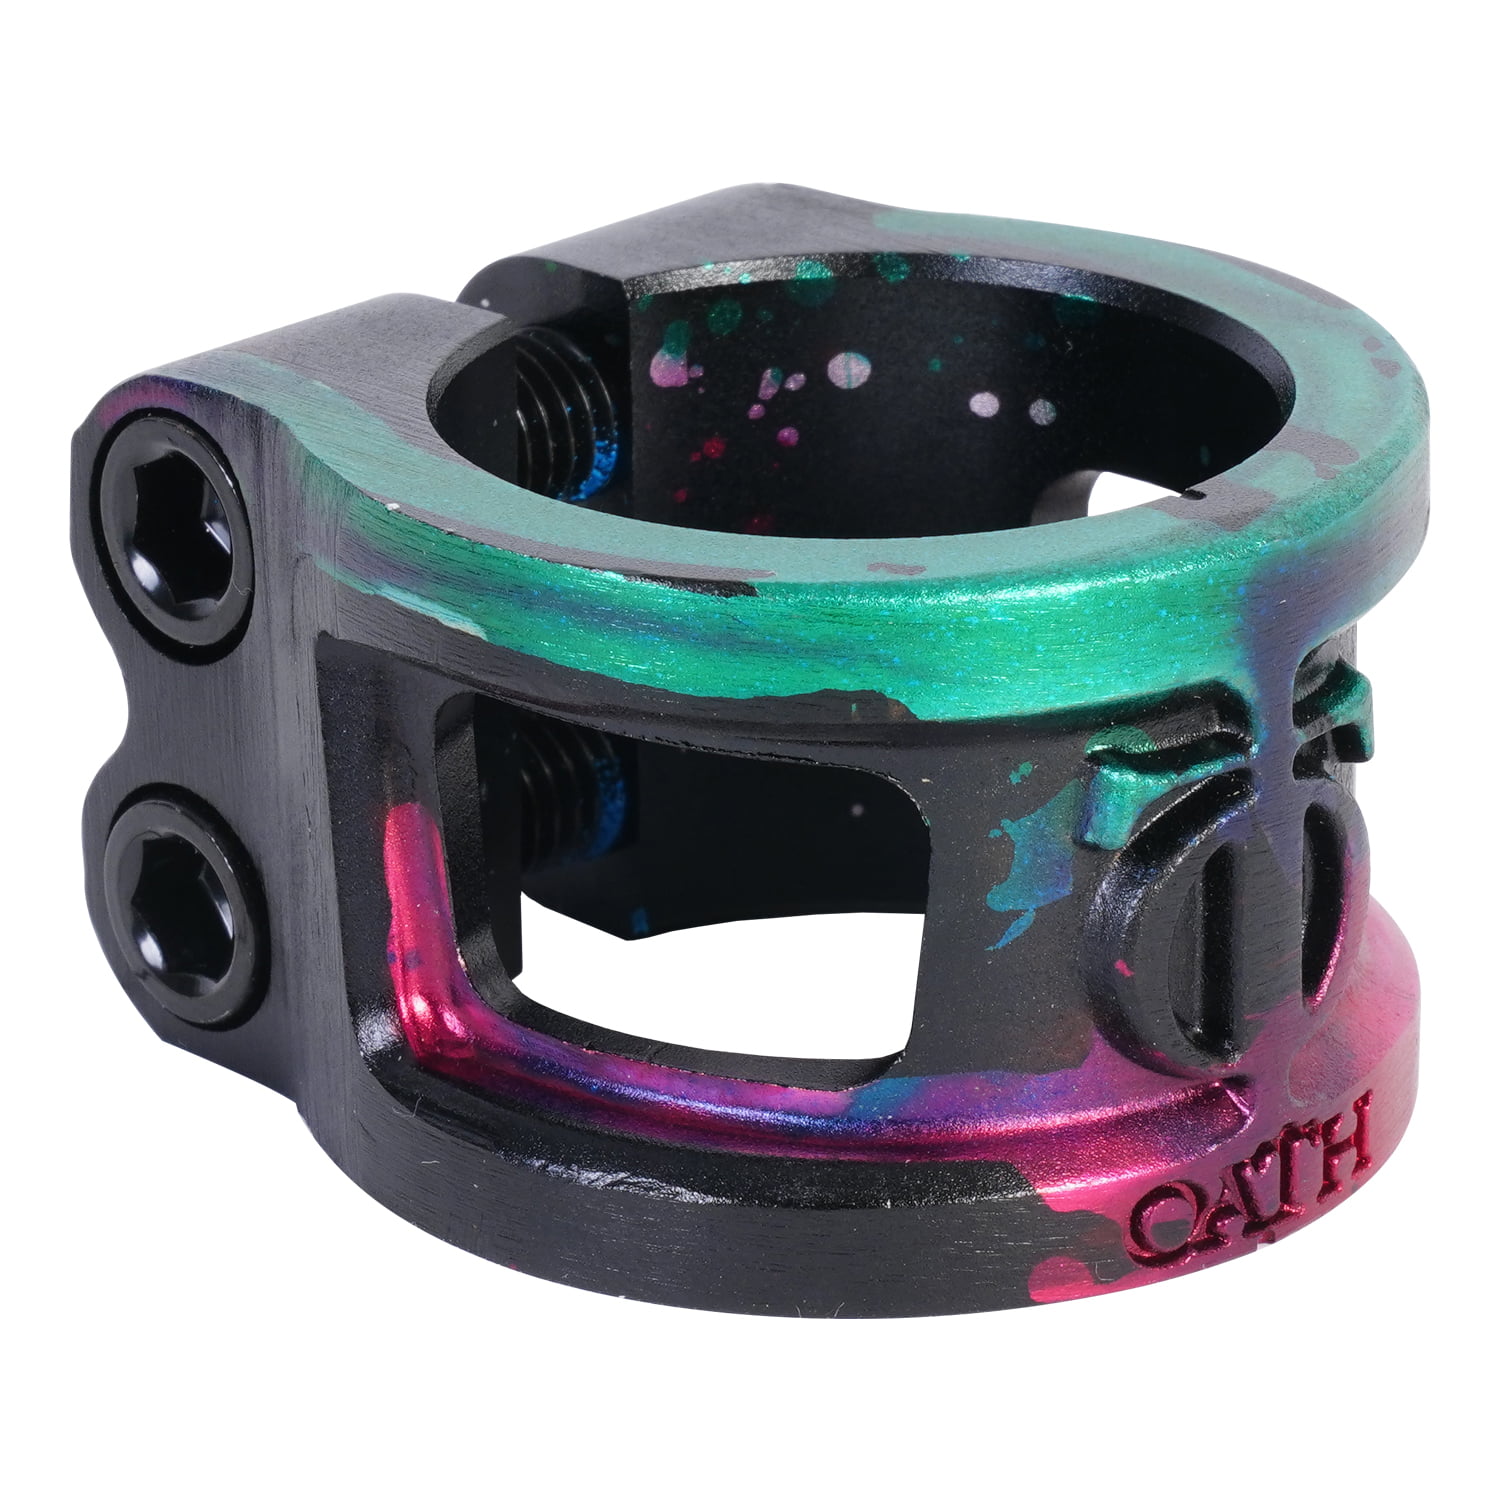 Cage V2 Alloy 2 Bolt Scooter Clamp, Triple Green, Pink Black, IHC/HIC, Aluminum, For Pro Scooters - Walmart.com